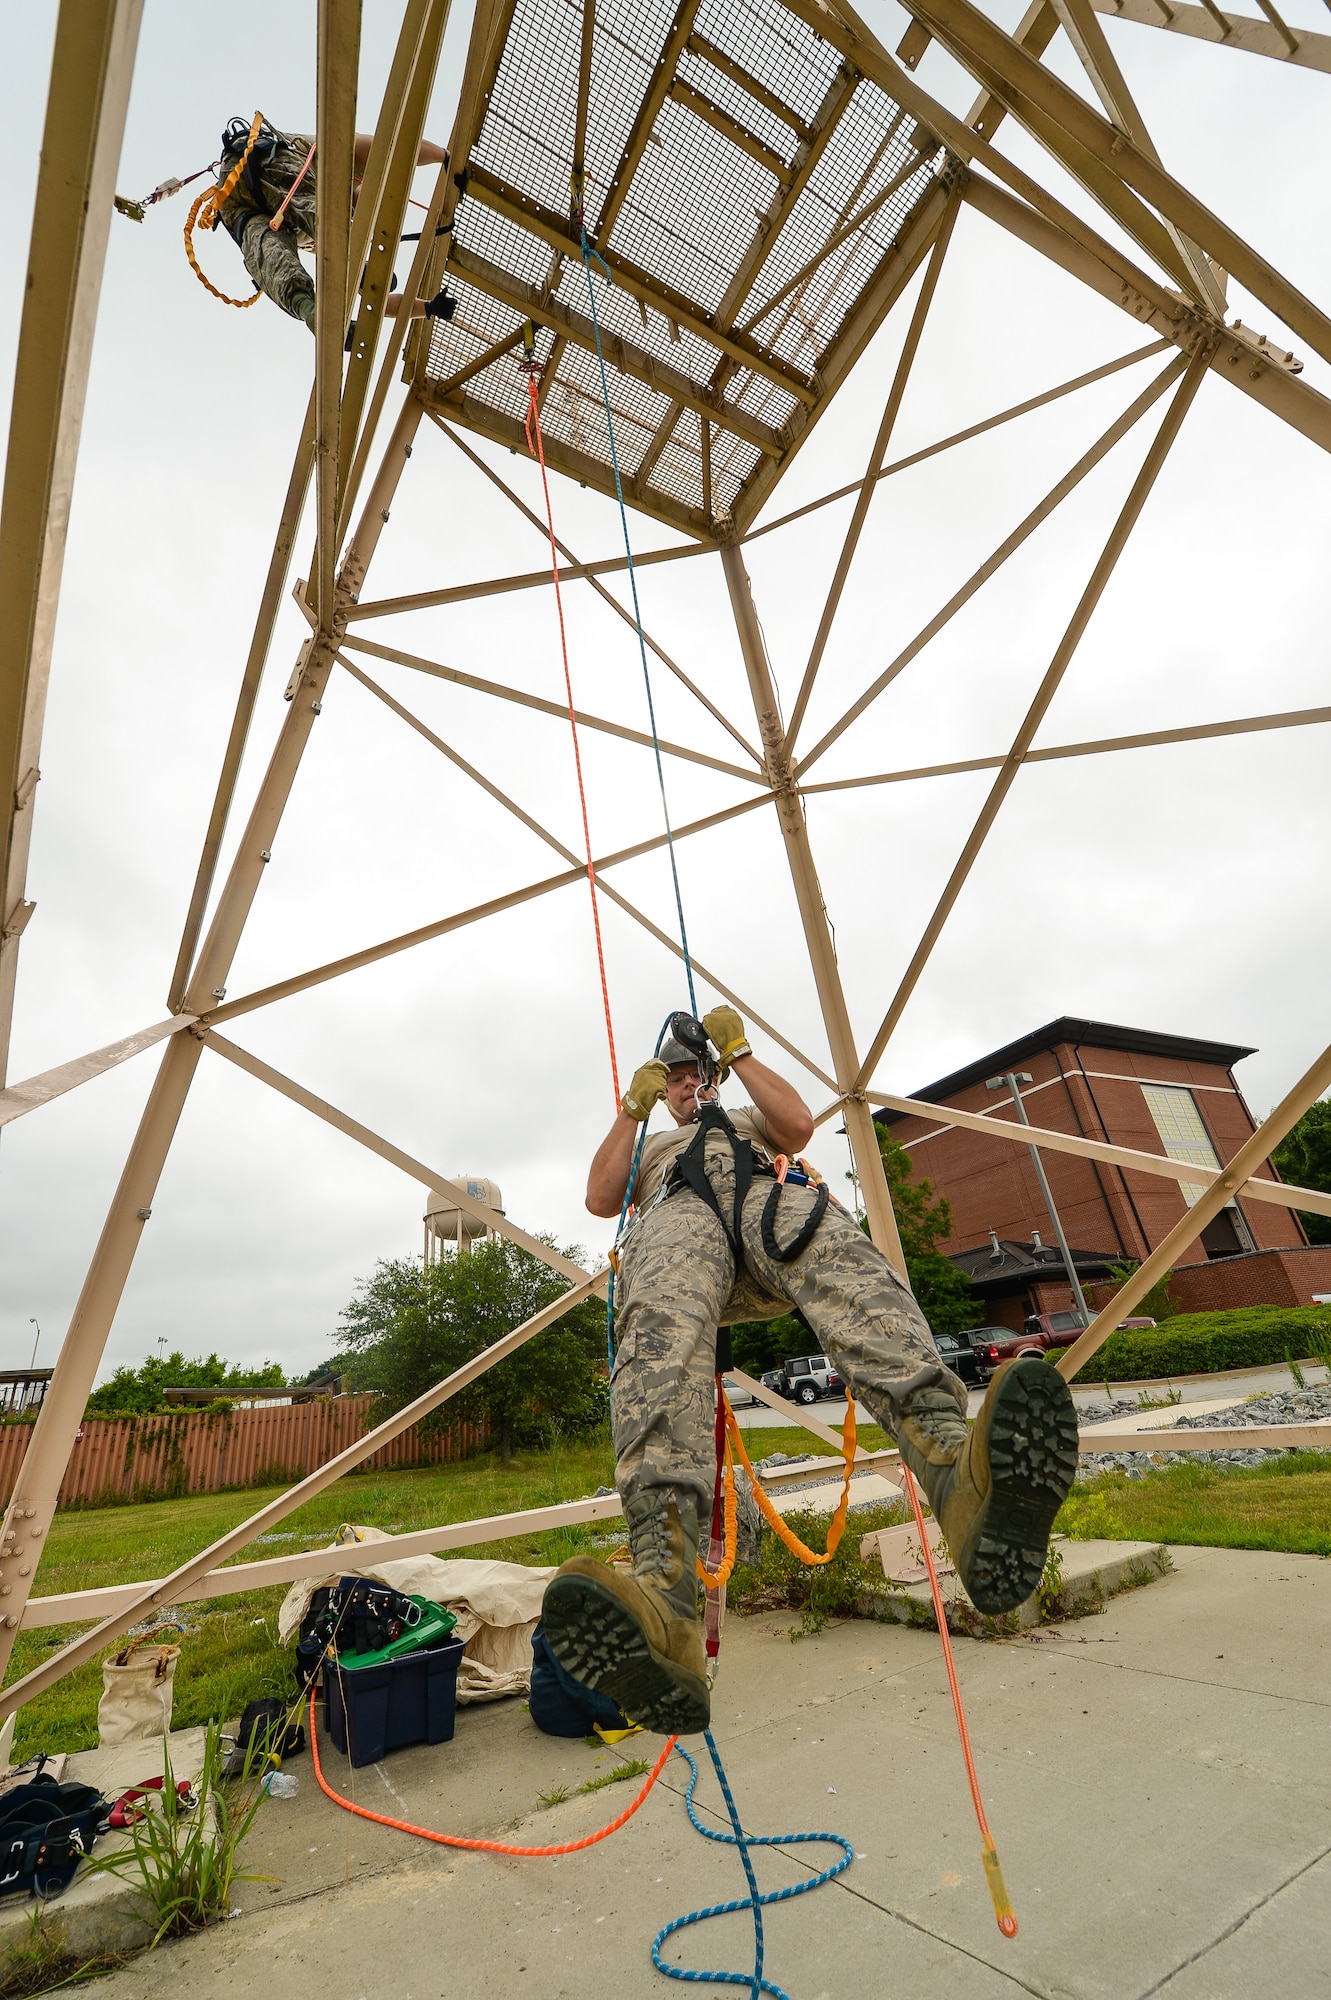 U.S. Air Force Staff Sgt. Andrew Batson, a cable antenna technician with the 202nd Engineering Installation Squadron (EIS), Georgia Air National Guard, repels from a tower during a tower climbing and rescue training exercise being conducted during the unit’s annual training at Robins Air Force Base, Ga., June 10, 2015. The 202nd EIS’s enlisted and officer engineers, draftsmen, cable and electronics professionals design and install communications infrastructures. Some of their duties include building antennas, towers, fiber optics, and surveillance equipment, to access control and intrusion detection systems anywhere in the world. (U.S. Air National Guard photo by Senior Master Sgt. Roger Parsons/Released) 